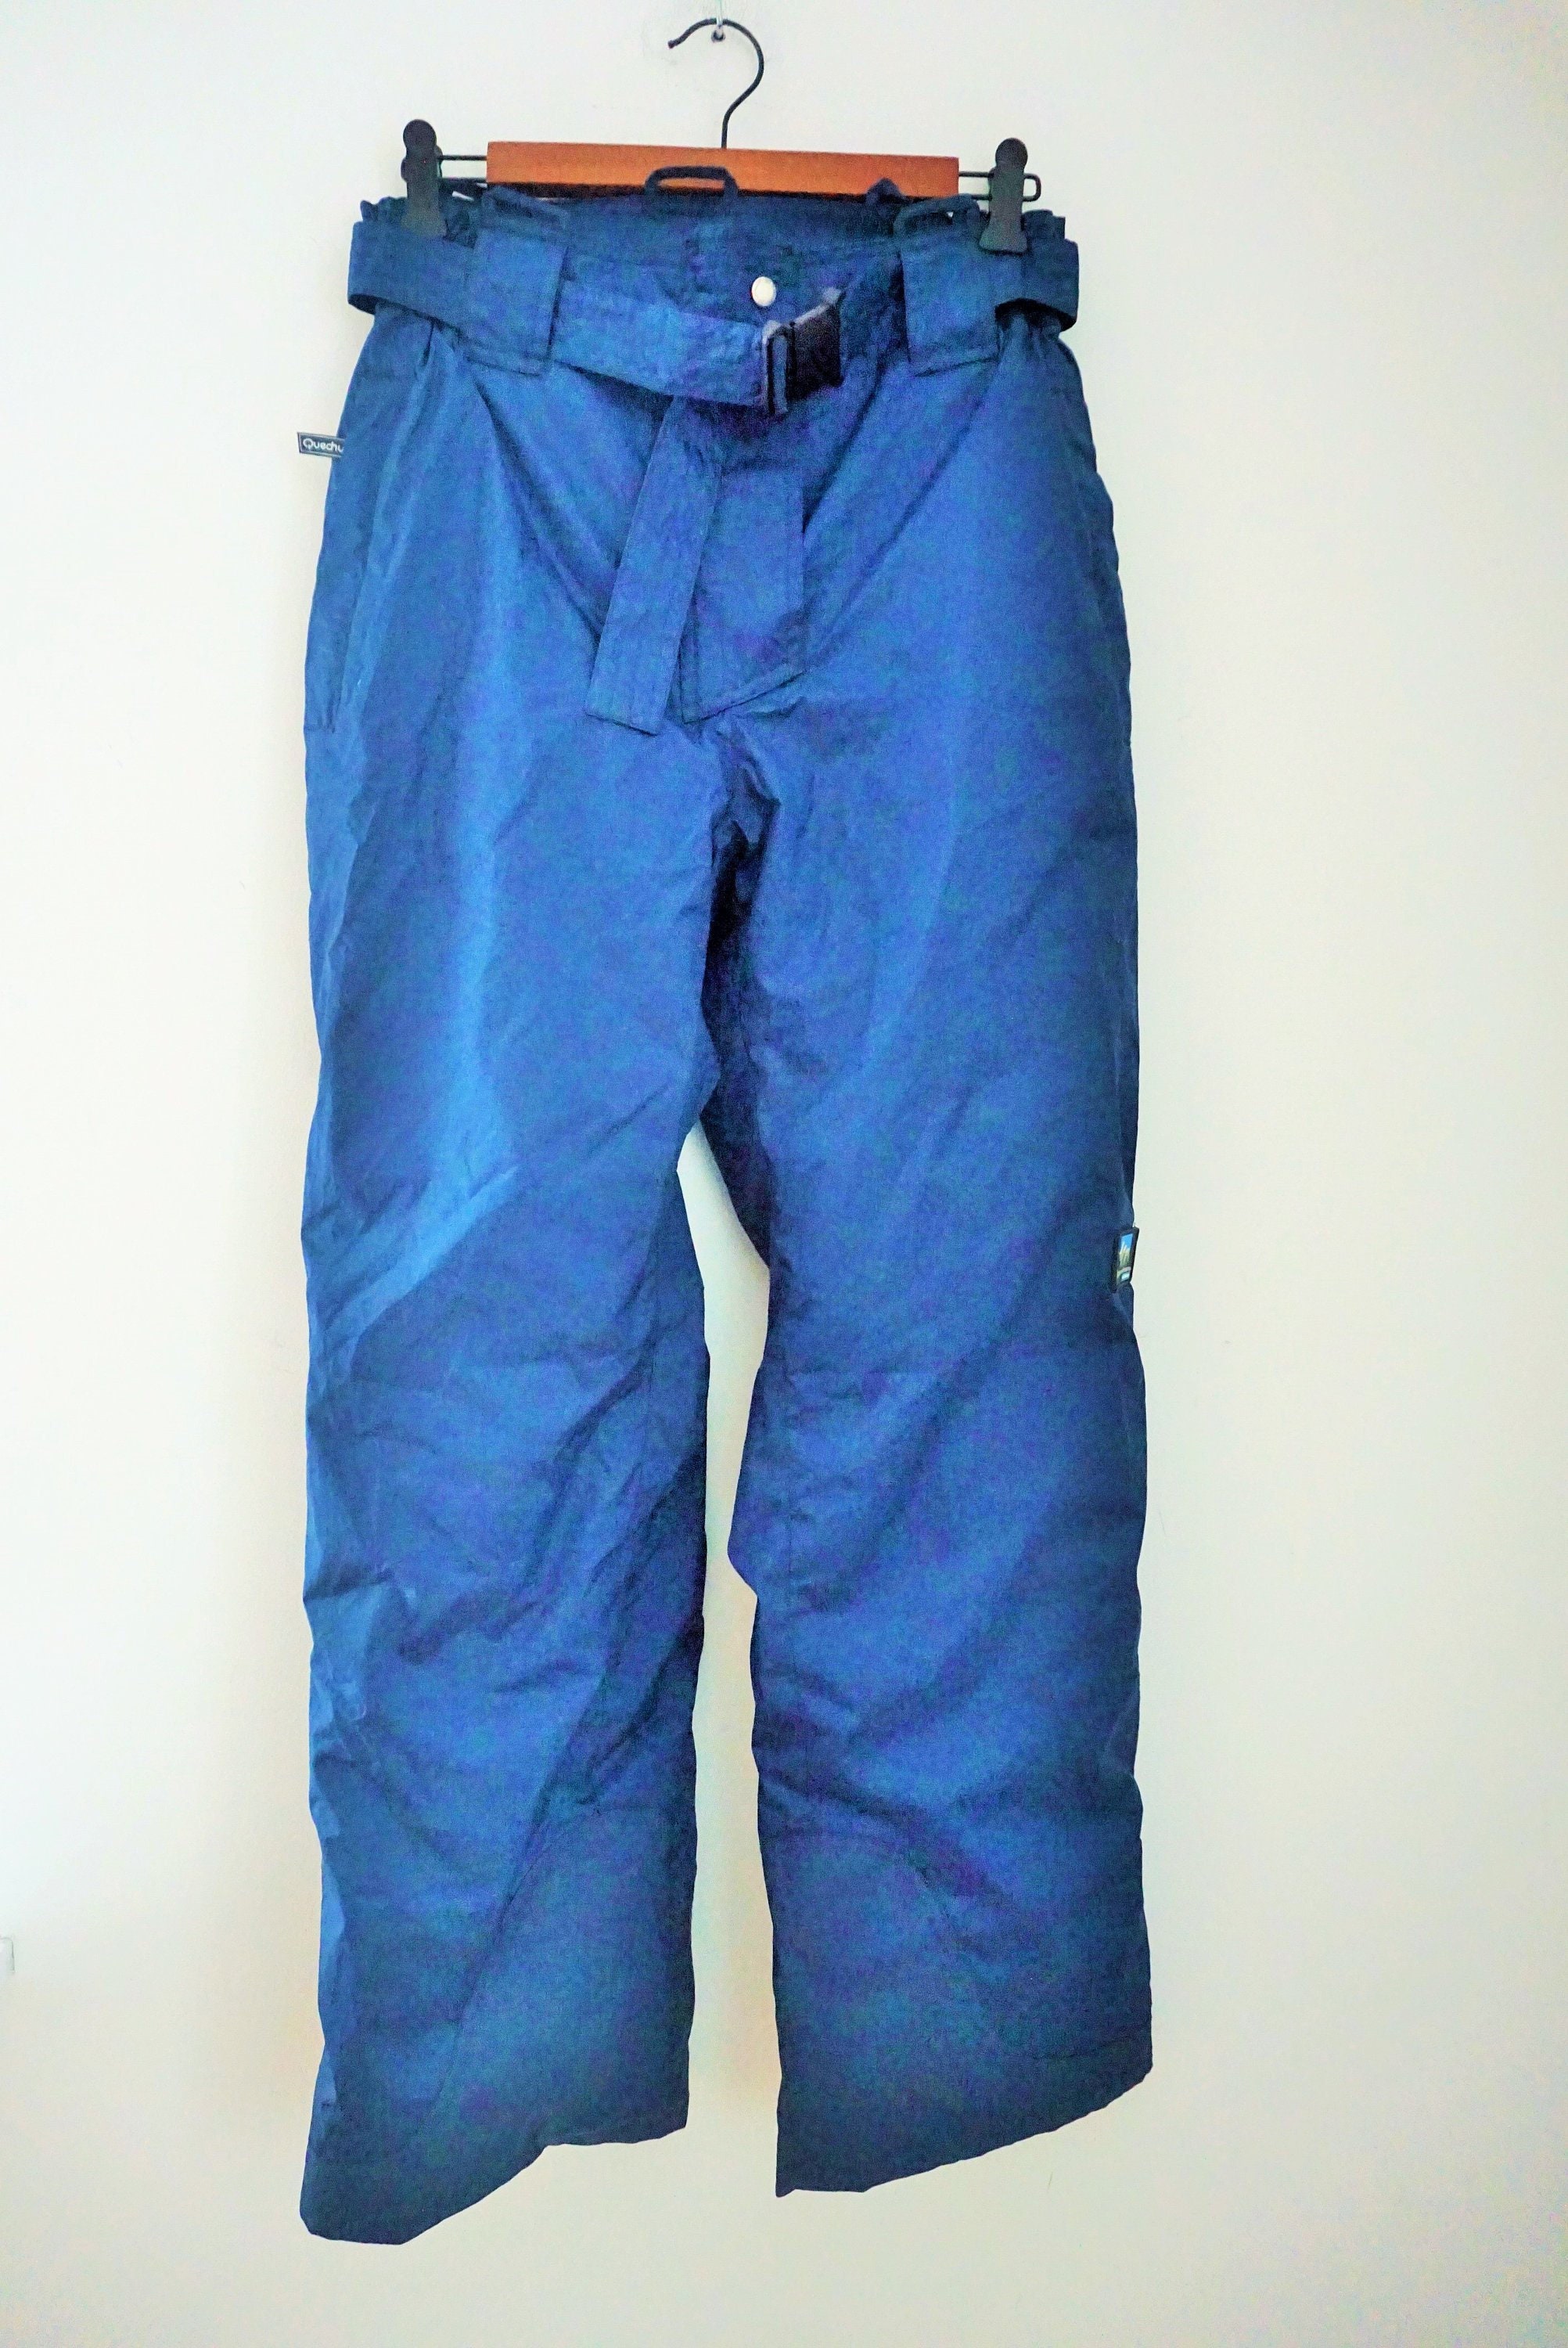 Vintage Skiing Trousers / Pants / Costume / Large / L / 42 / | Etsy